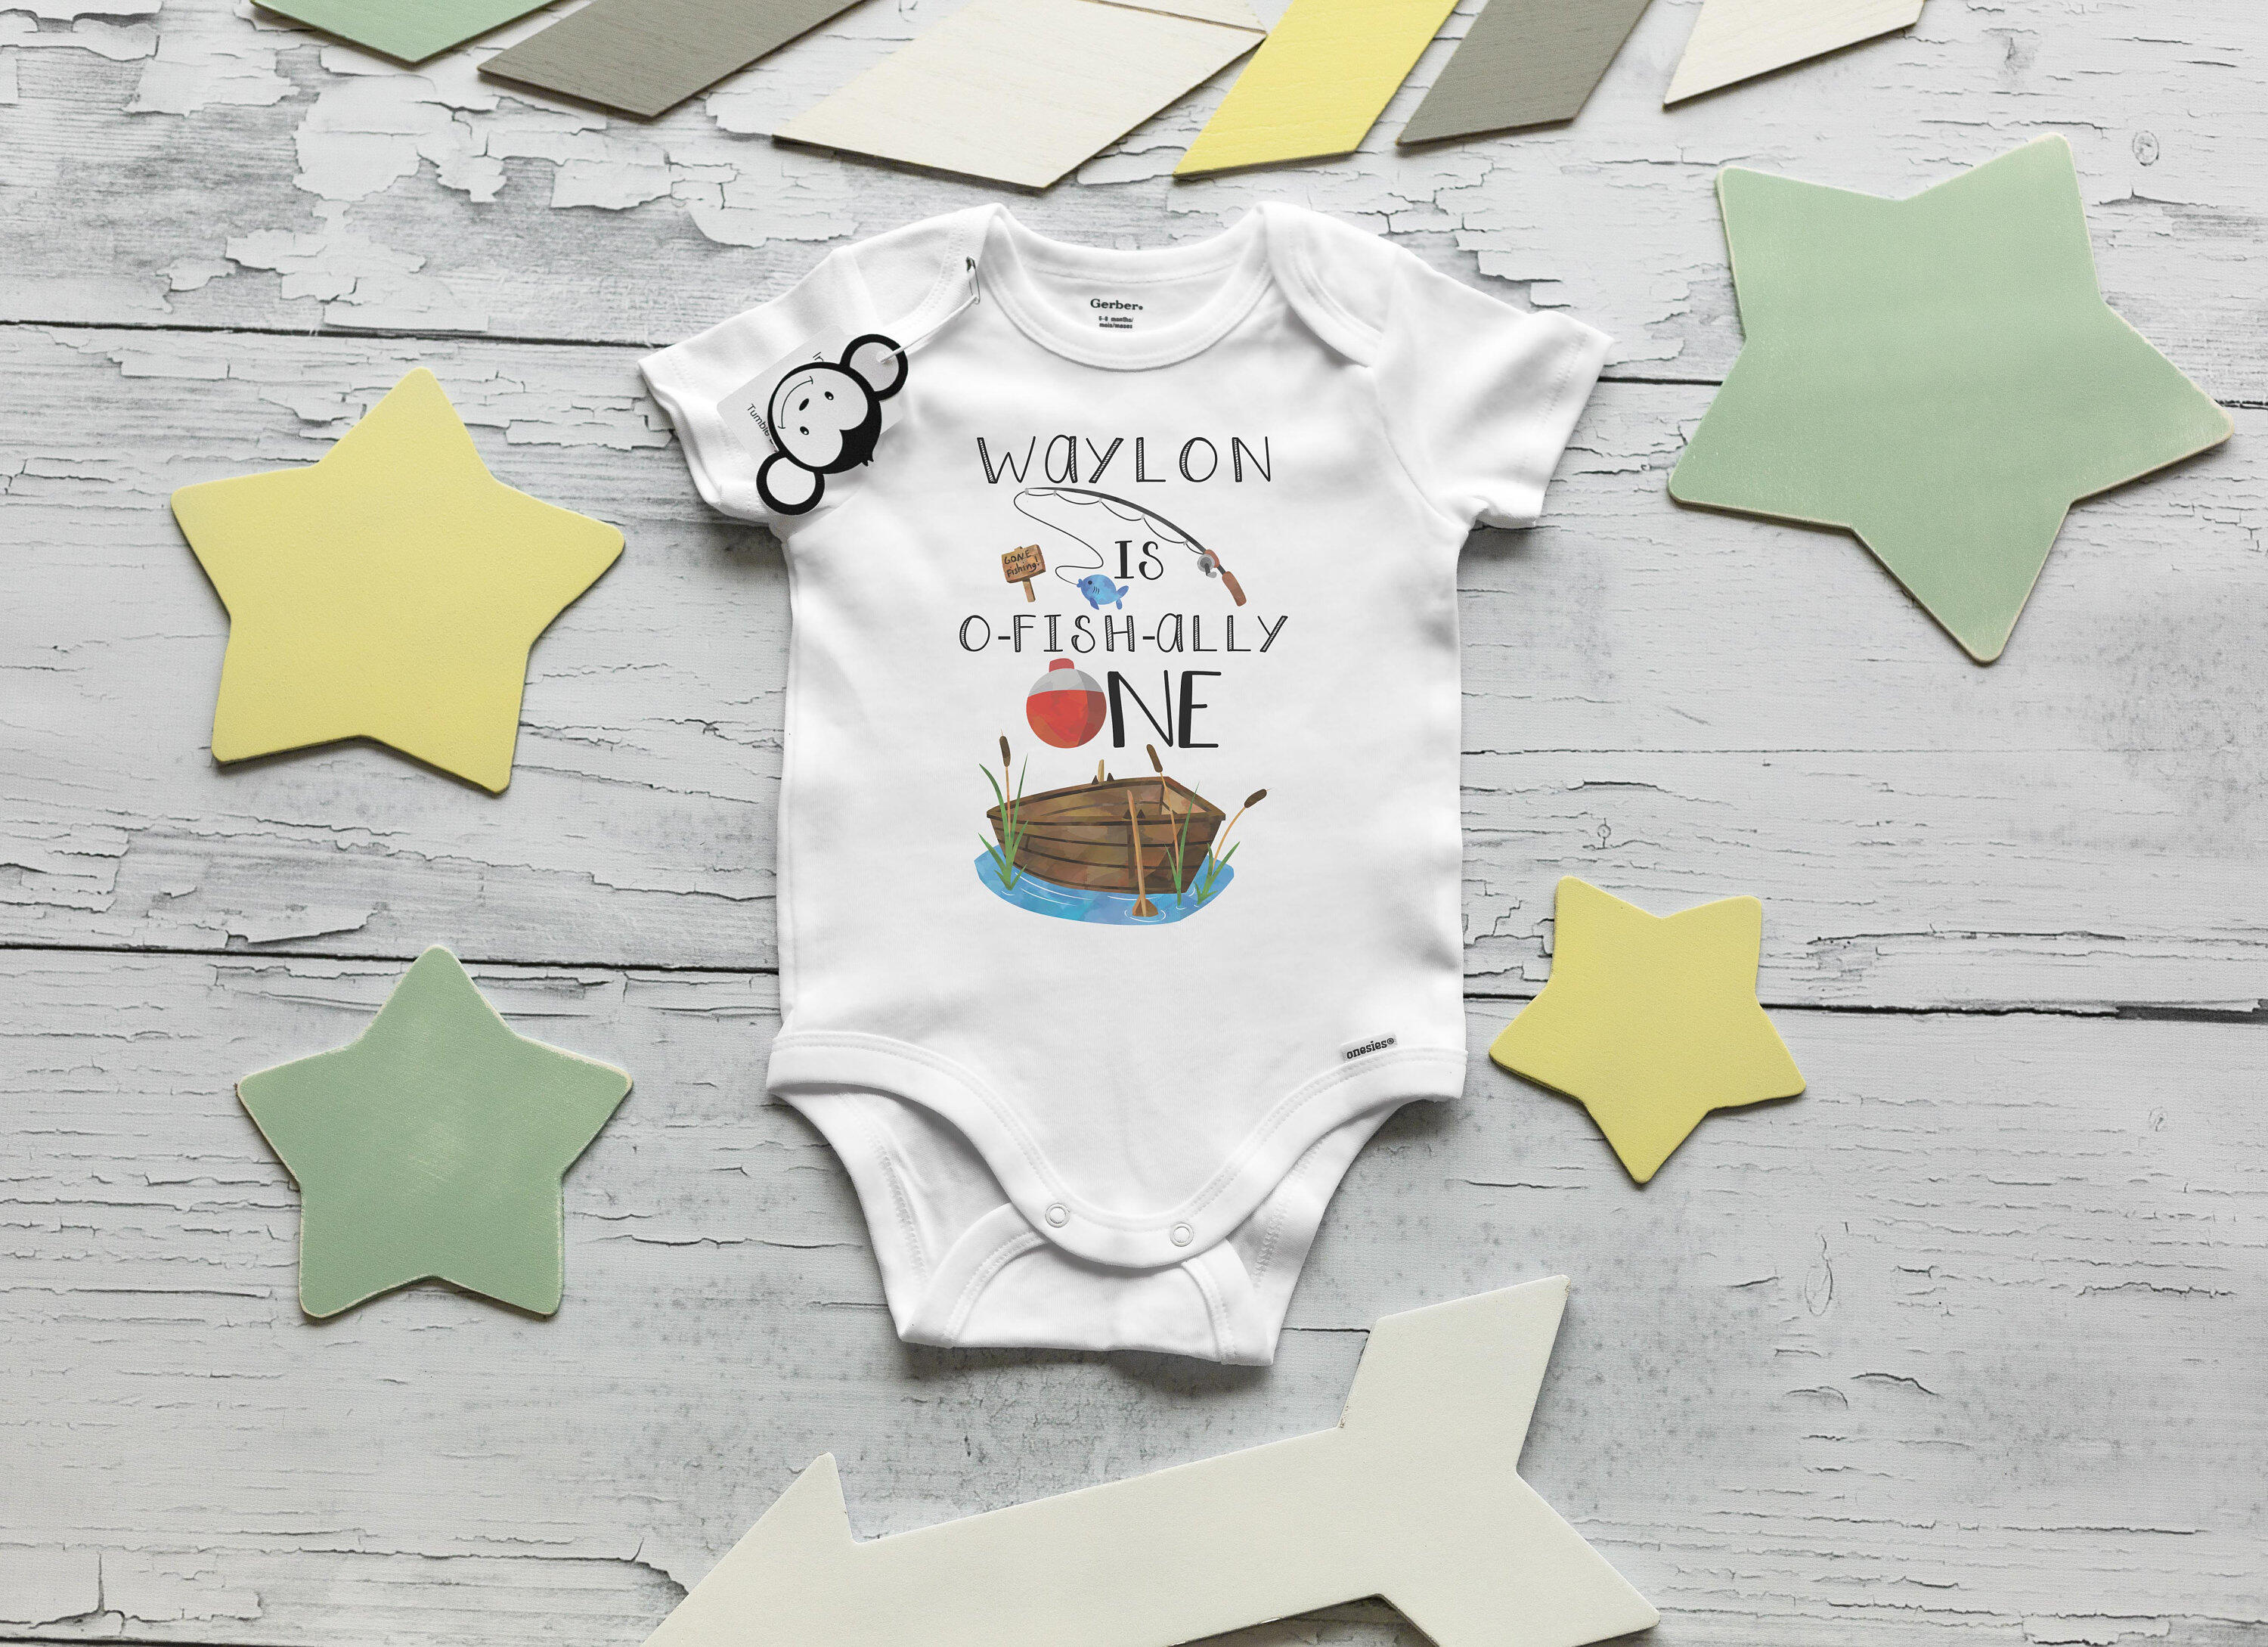 Clothing & Accessories :: Kids & Baby :: Baby Clothing :: Fishing